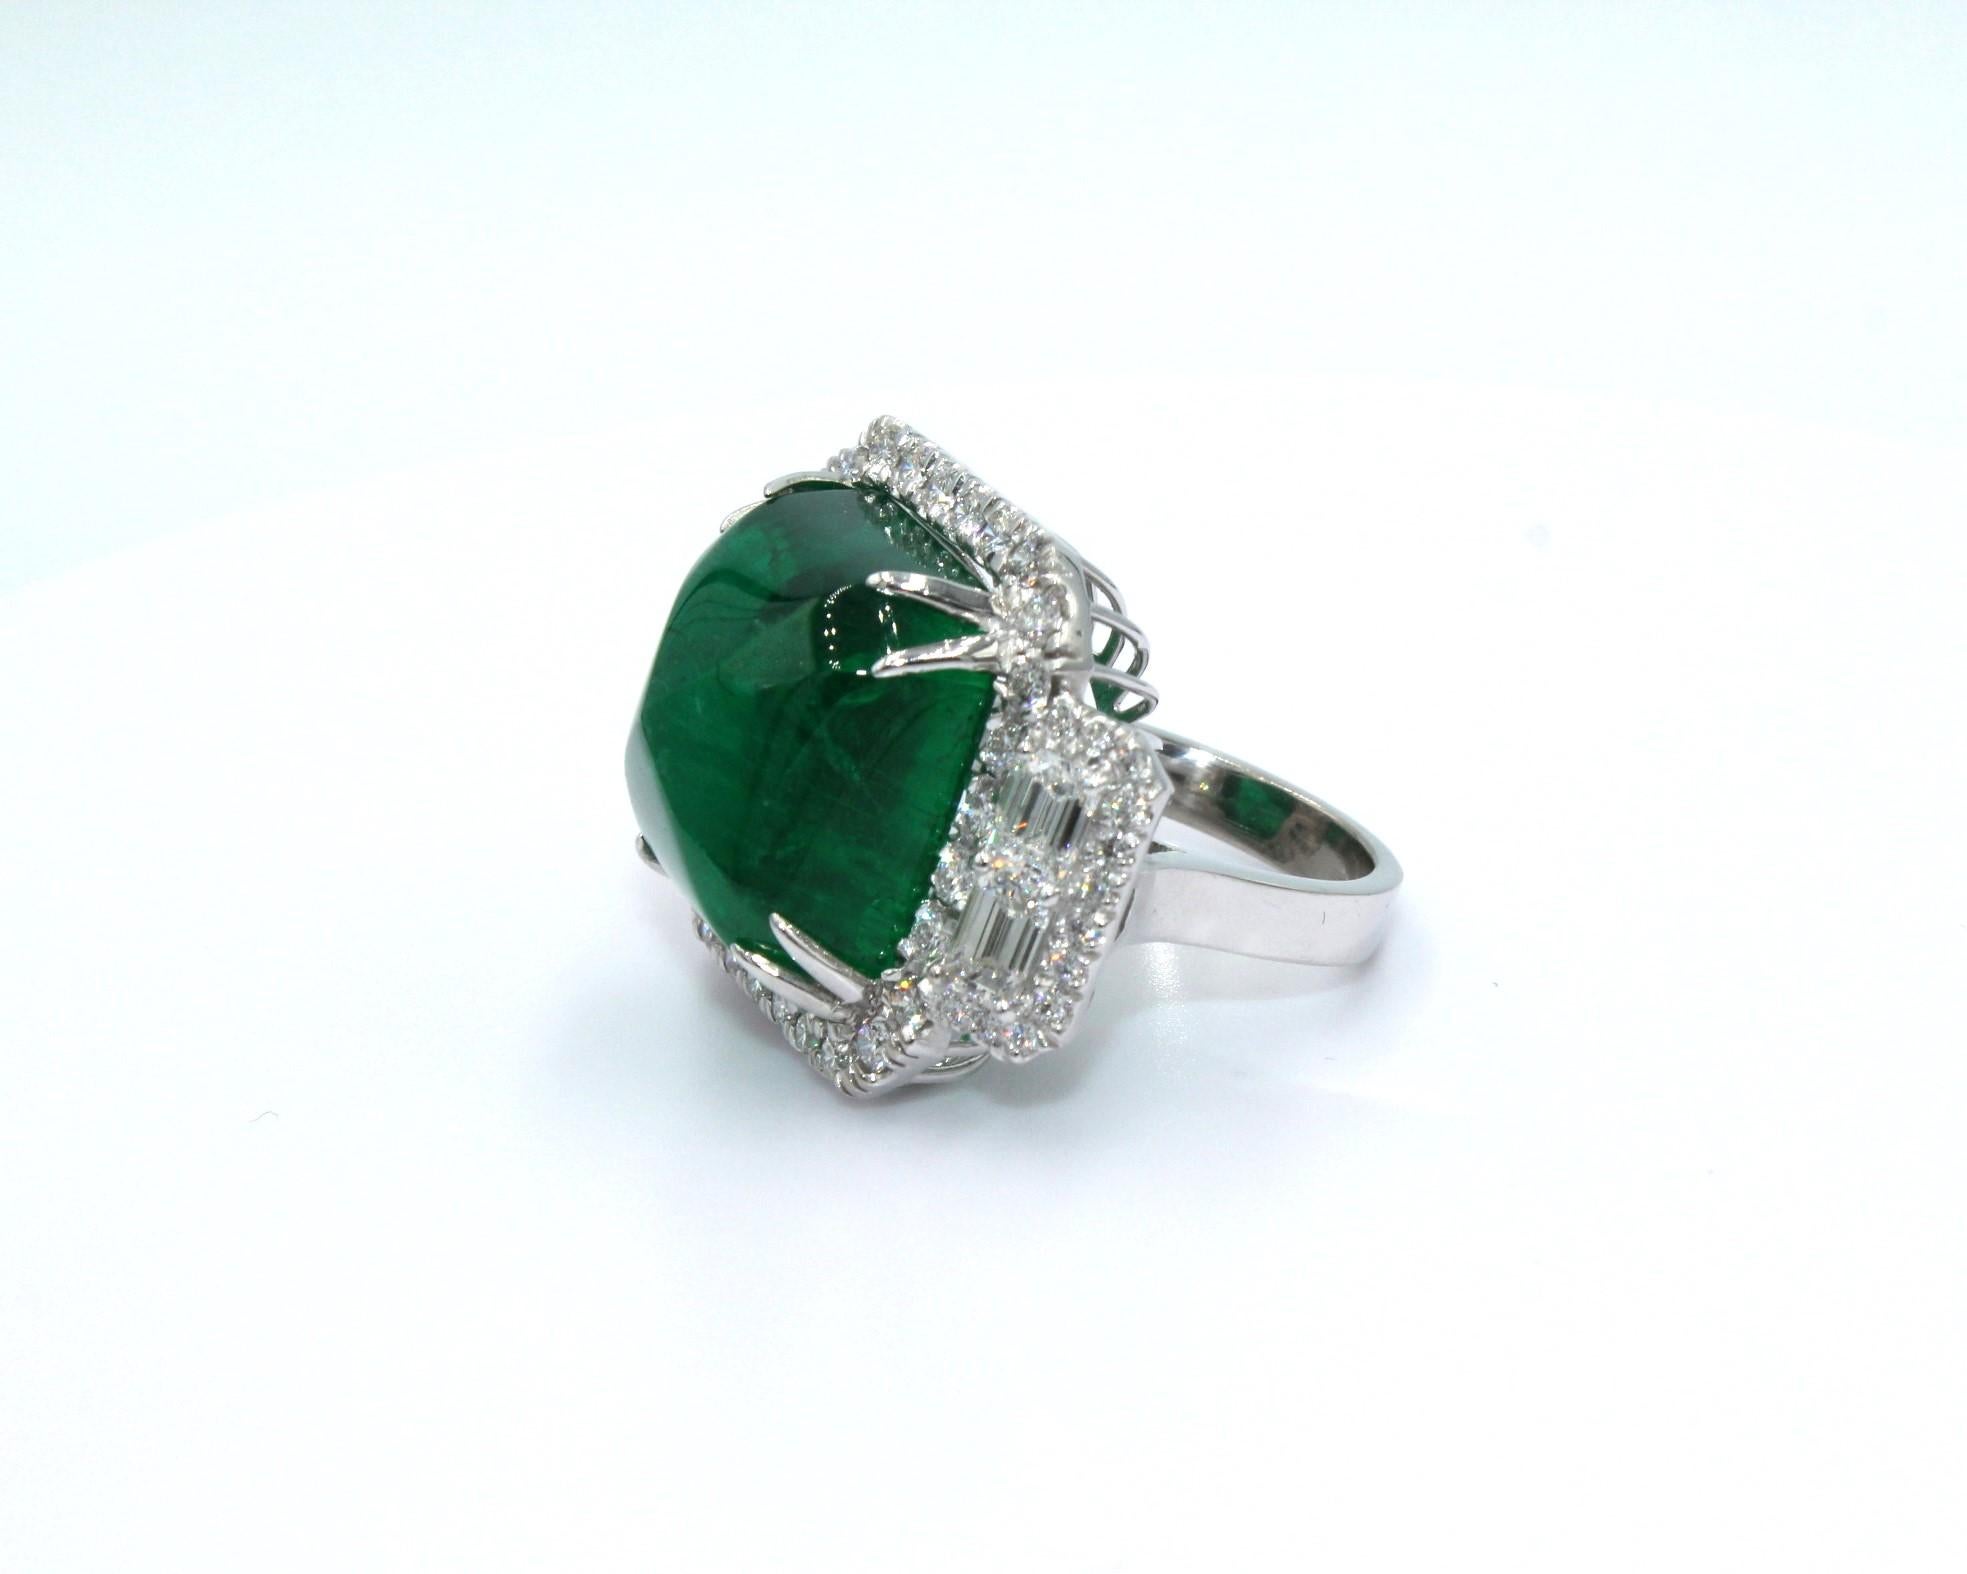 32.62 carats Sugarloaf Cabochon Zambian Emerald with framing 53 round diamonds and 4 emerald-cut diamonds on both sides, totaling a diamond weight of 3.11 carats. 

This piece will highlight your elegance and uniqueness. 

*Lab Certificate is